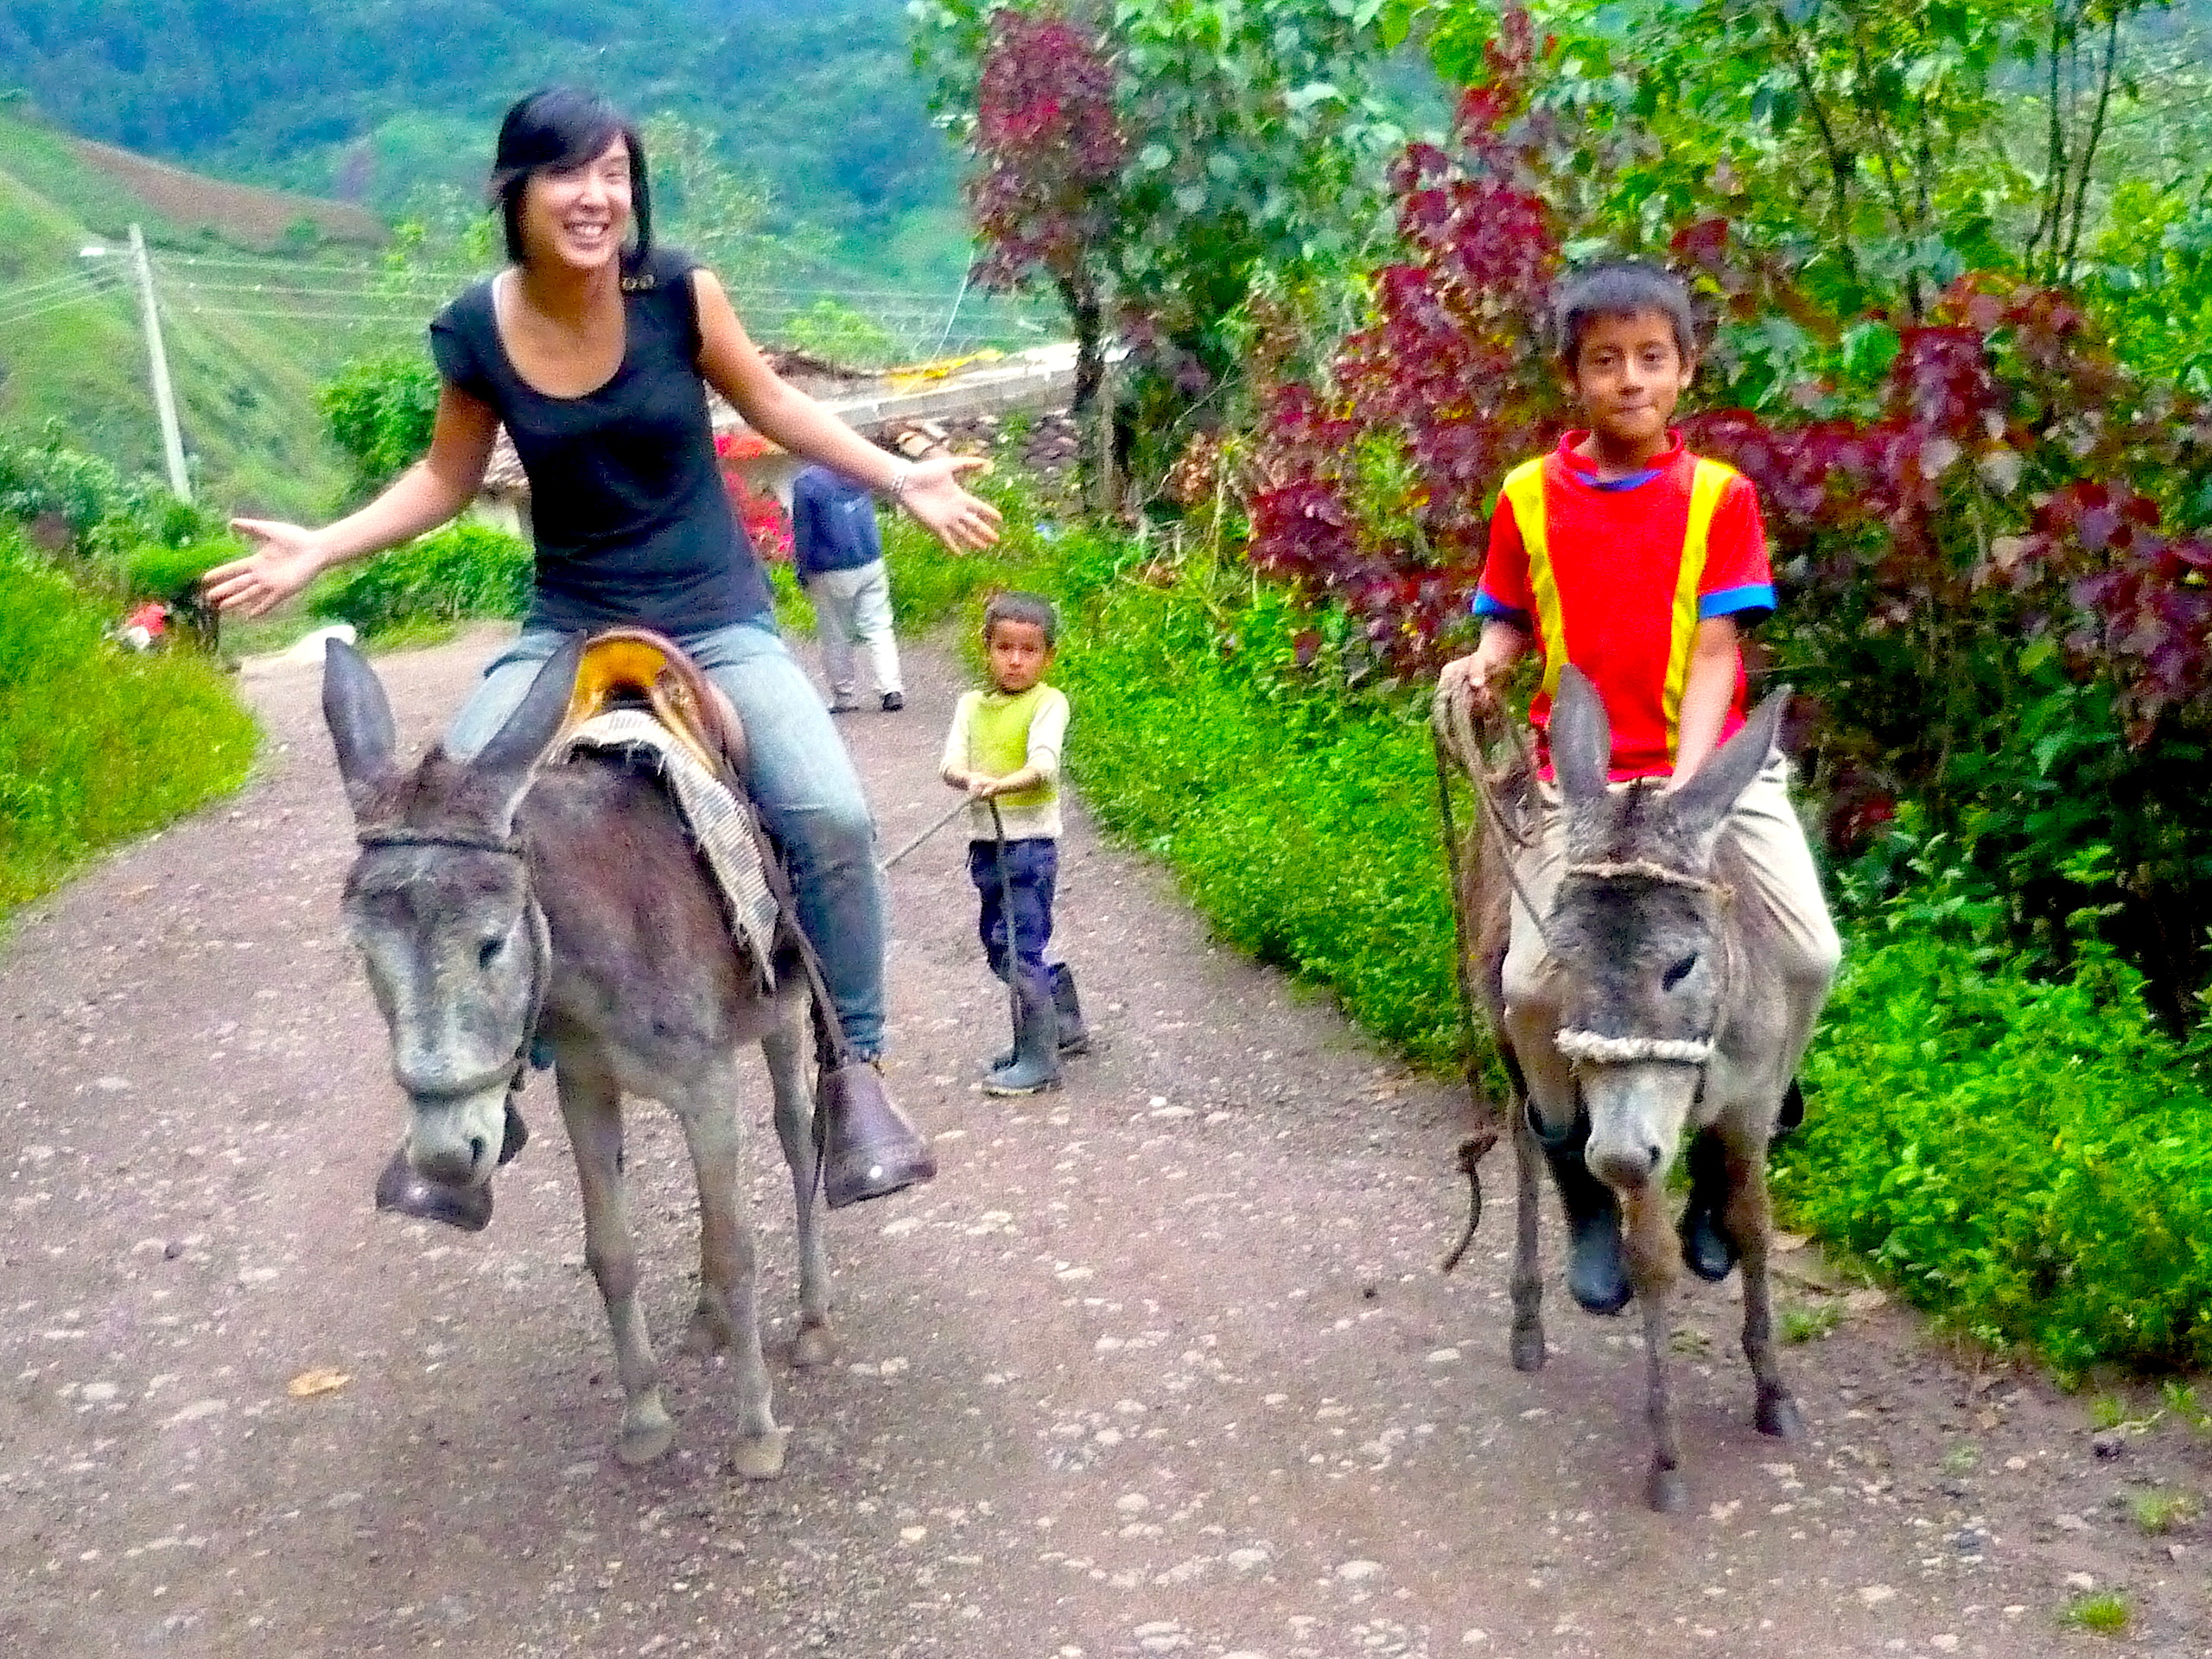 'Cause Missionaries ride donkeys and take photos with ethnic kids ... right? (The lack of a Bible in my hand must make me a bad, weaponless missionary)